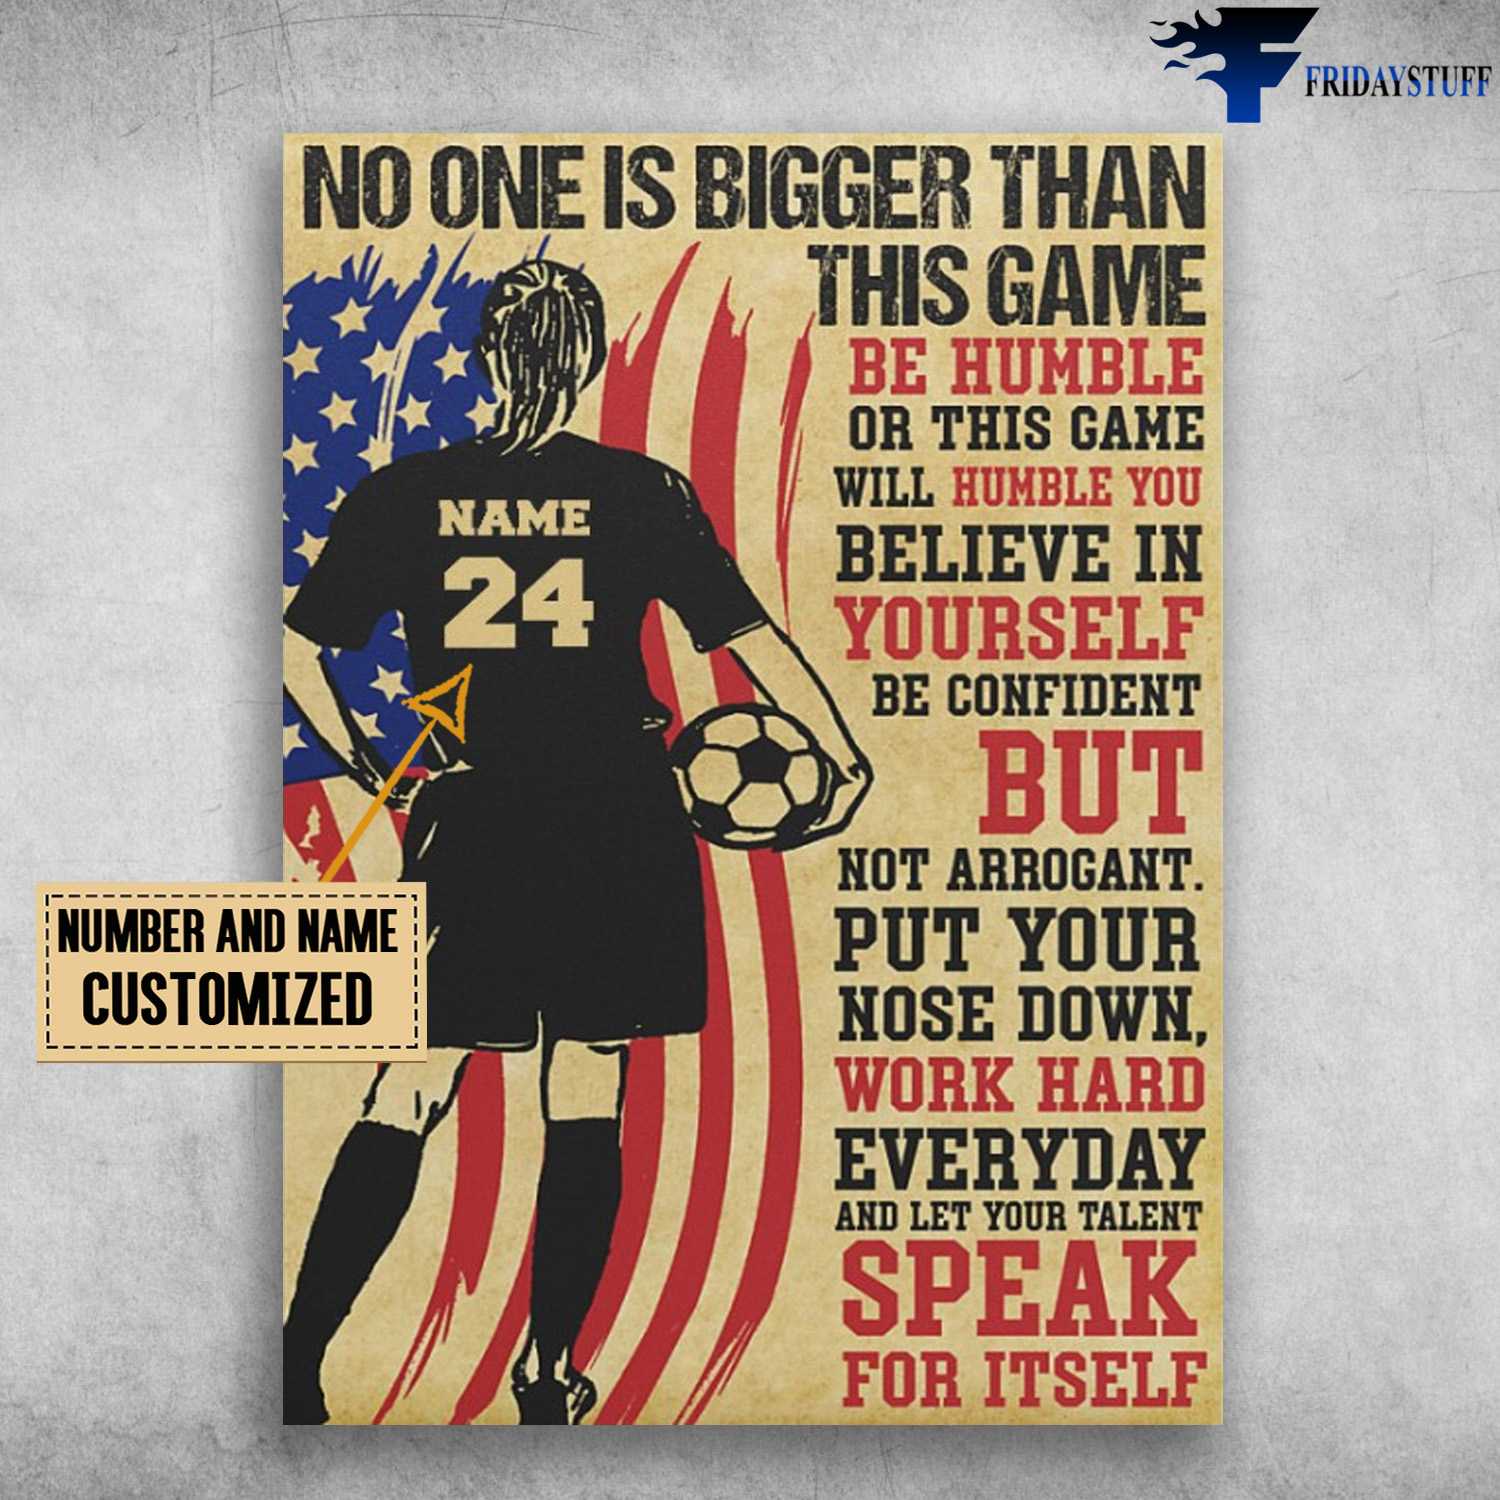 Soccer Girl, Soccer Player, American Soccer, No One Is Bigger Than This Game, Be Humble, Or This Game Will Humble You, Believe In Yourself, Be Confident, But Not Arrogant